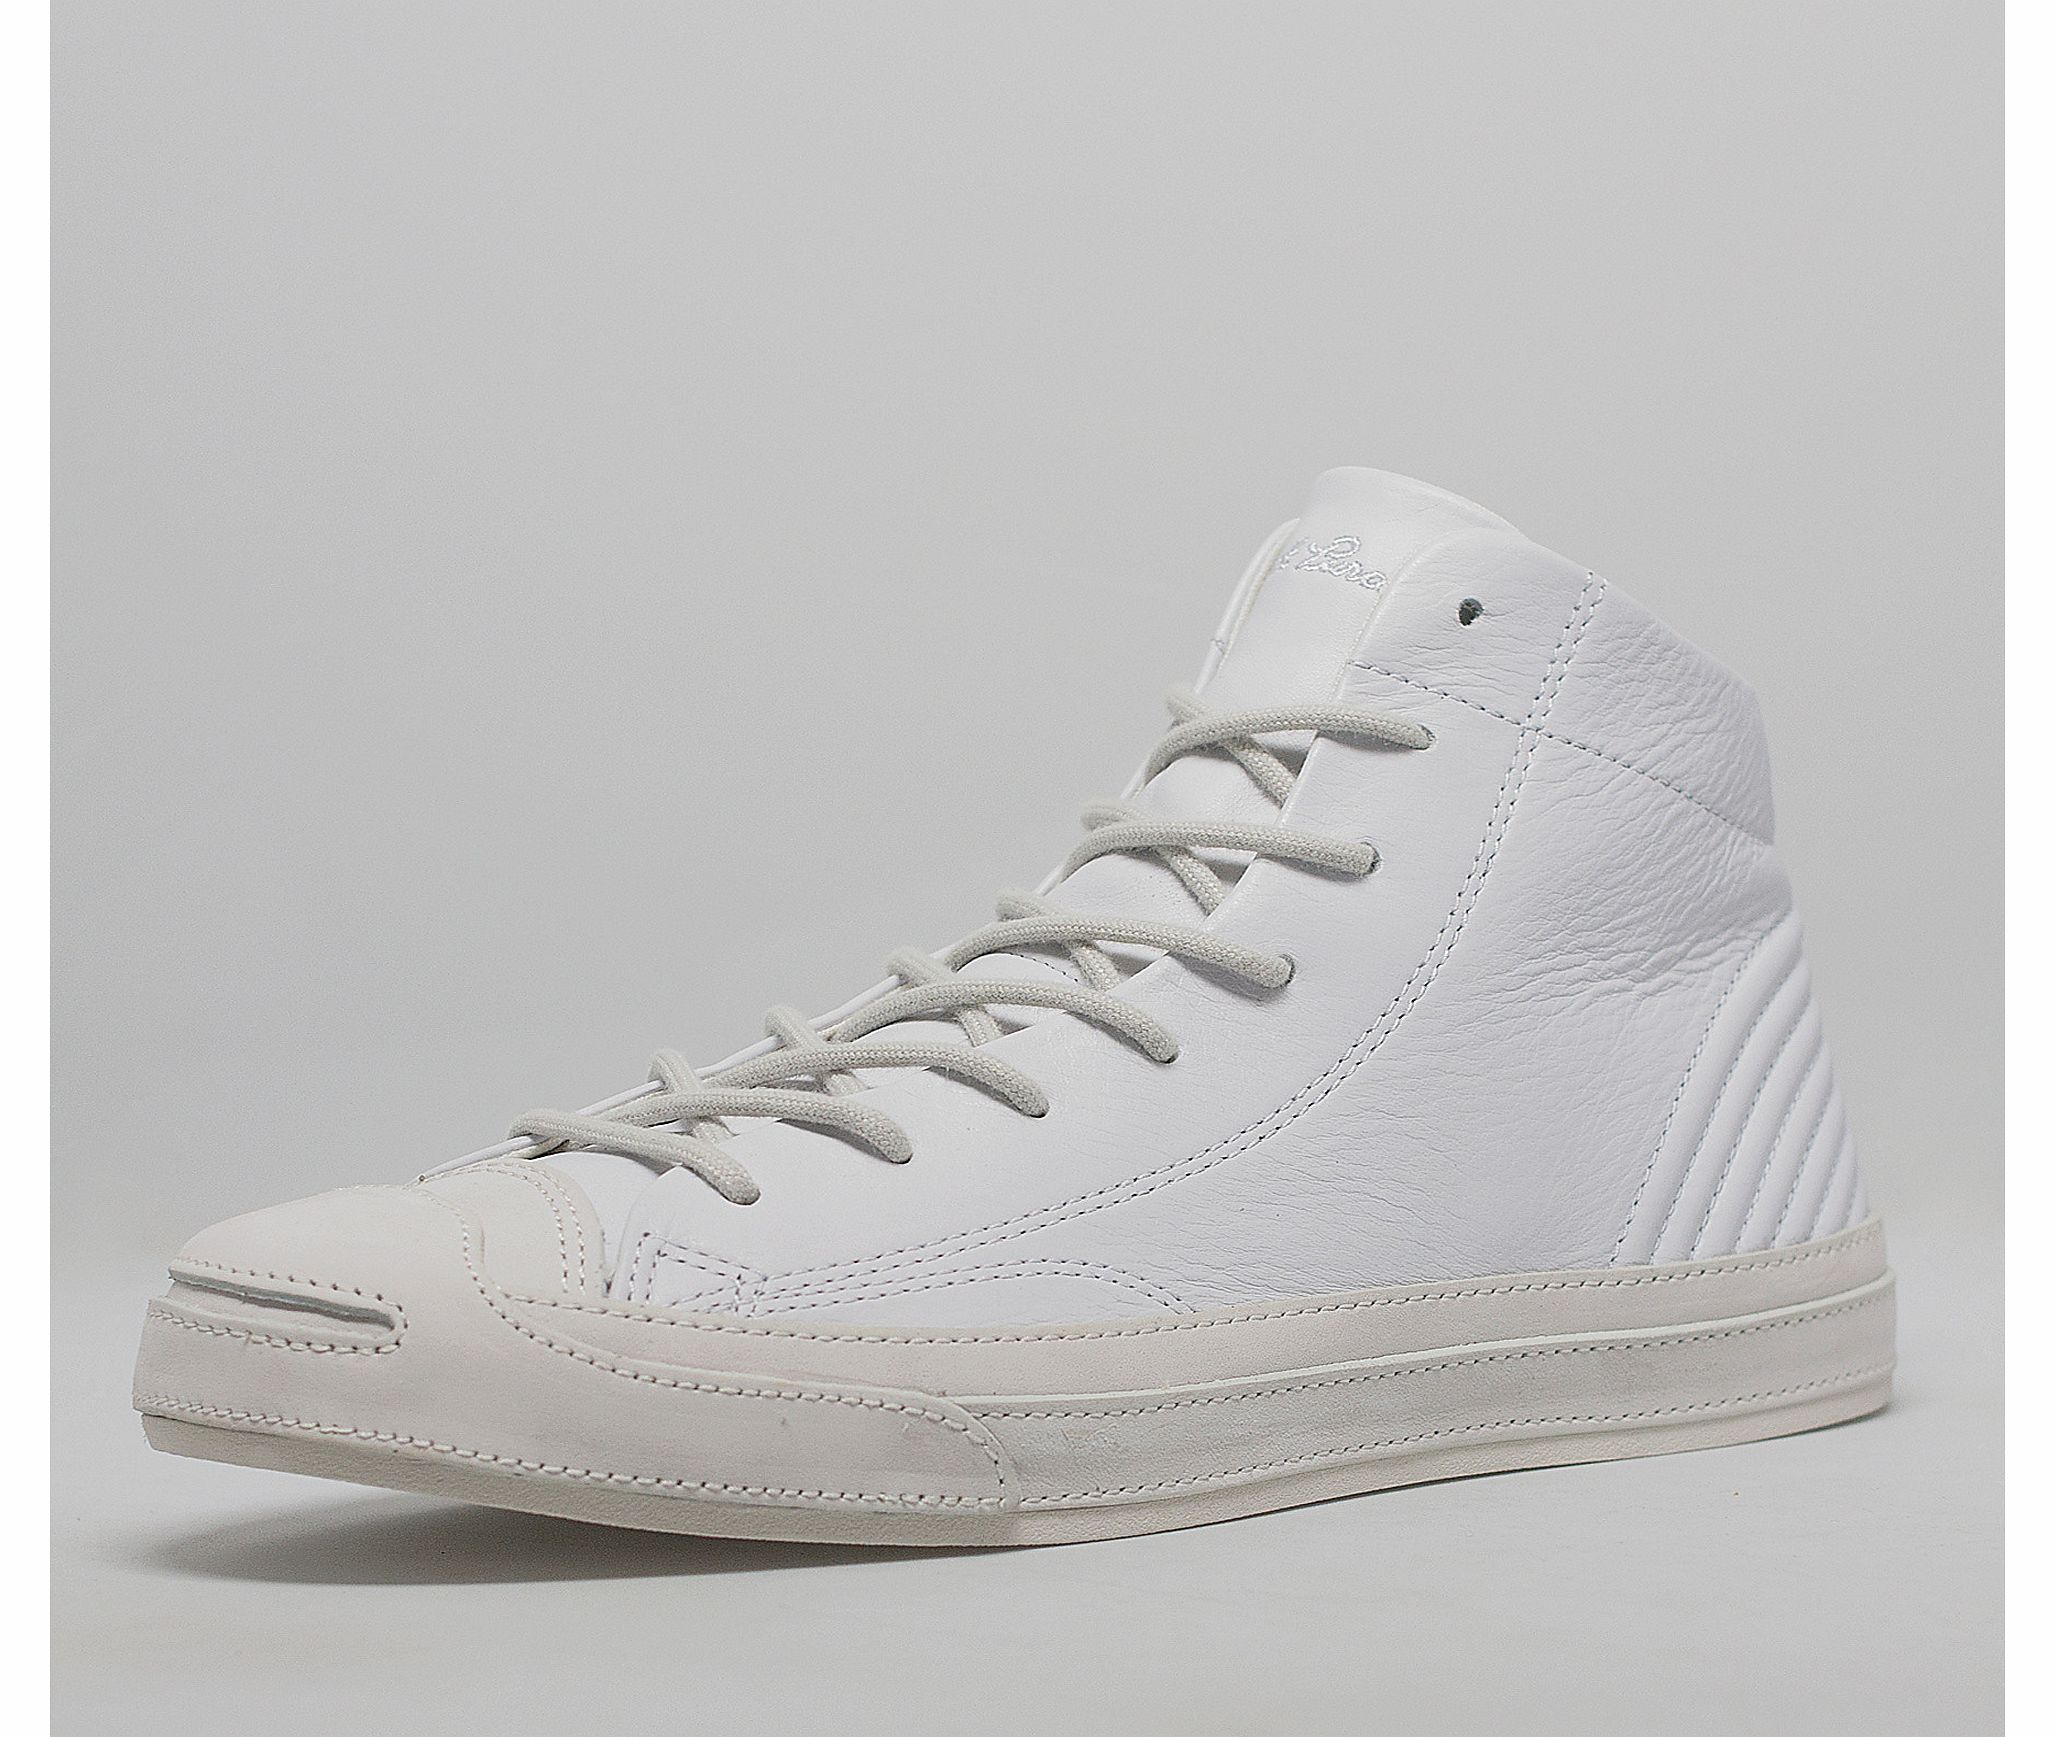 Converse Jack Purcell Mid Quilt Motorcycle QS